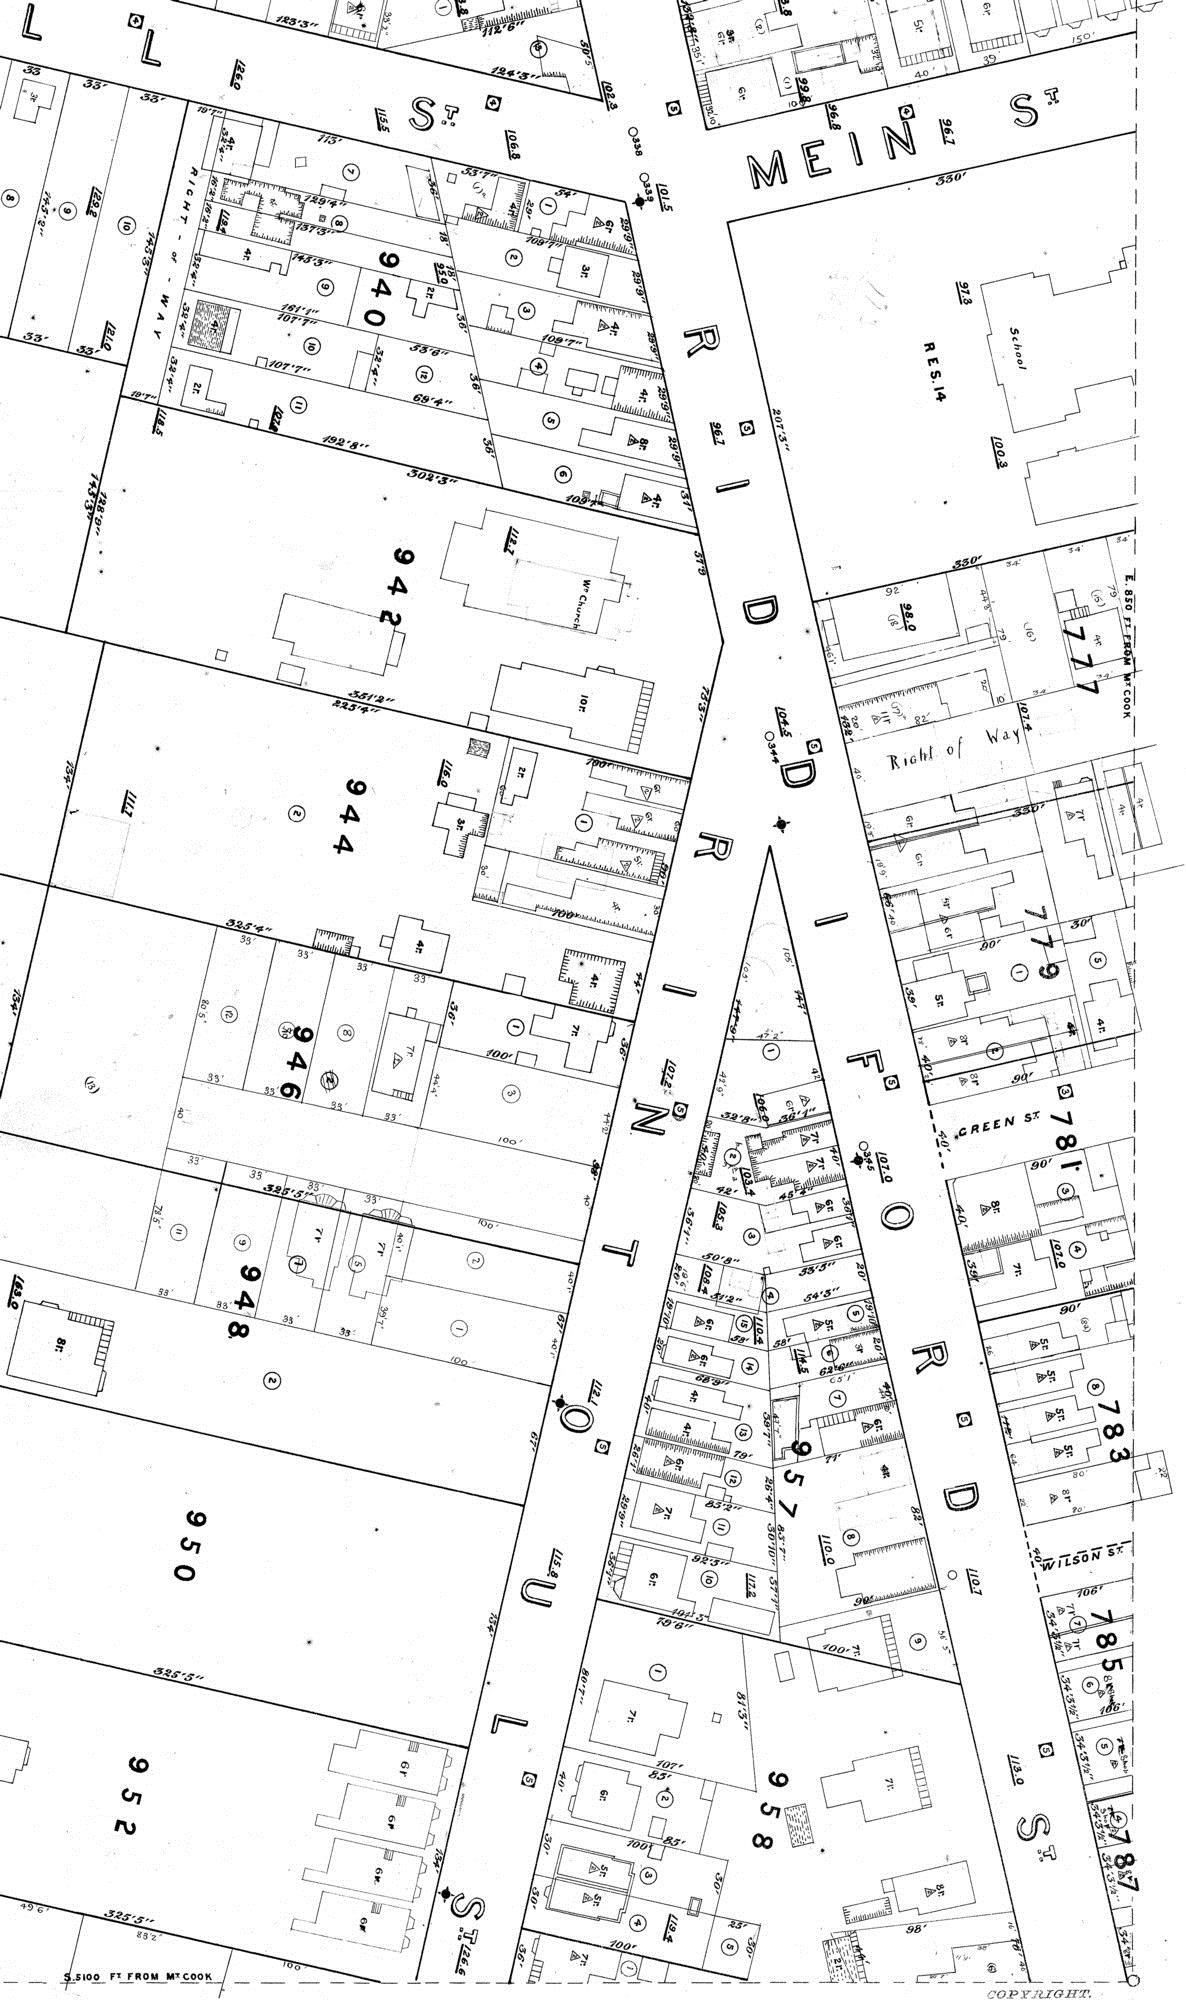 Ward Map, 1900, showing a portion of Riddiford Street and Rintoul Street. Much of the space along the road is occupied by shops by this time. Image: WCA, Ward Map 84, 1900 00514_09_04 